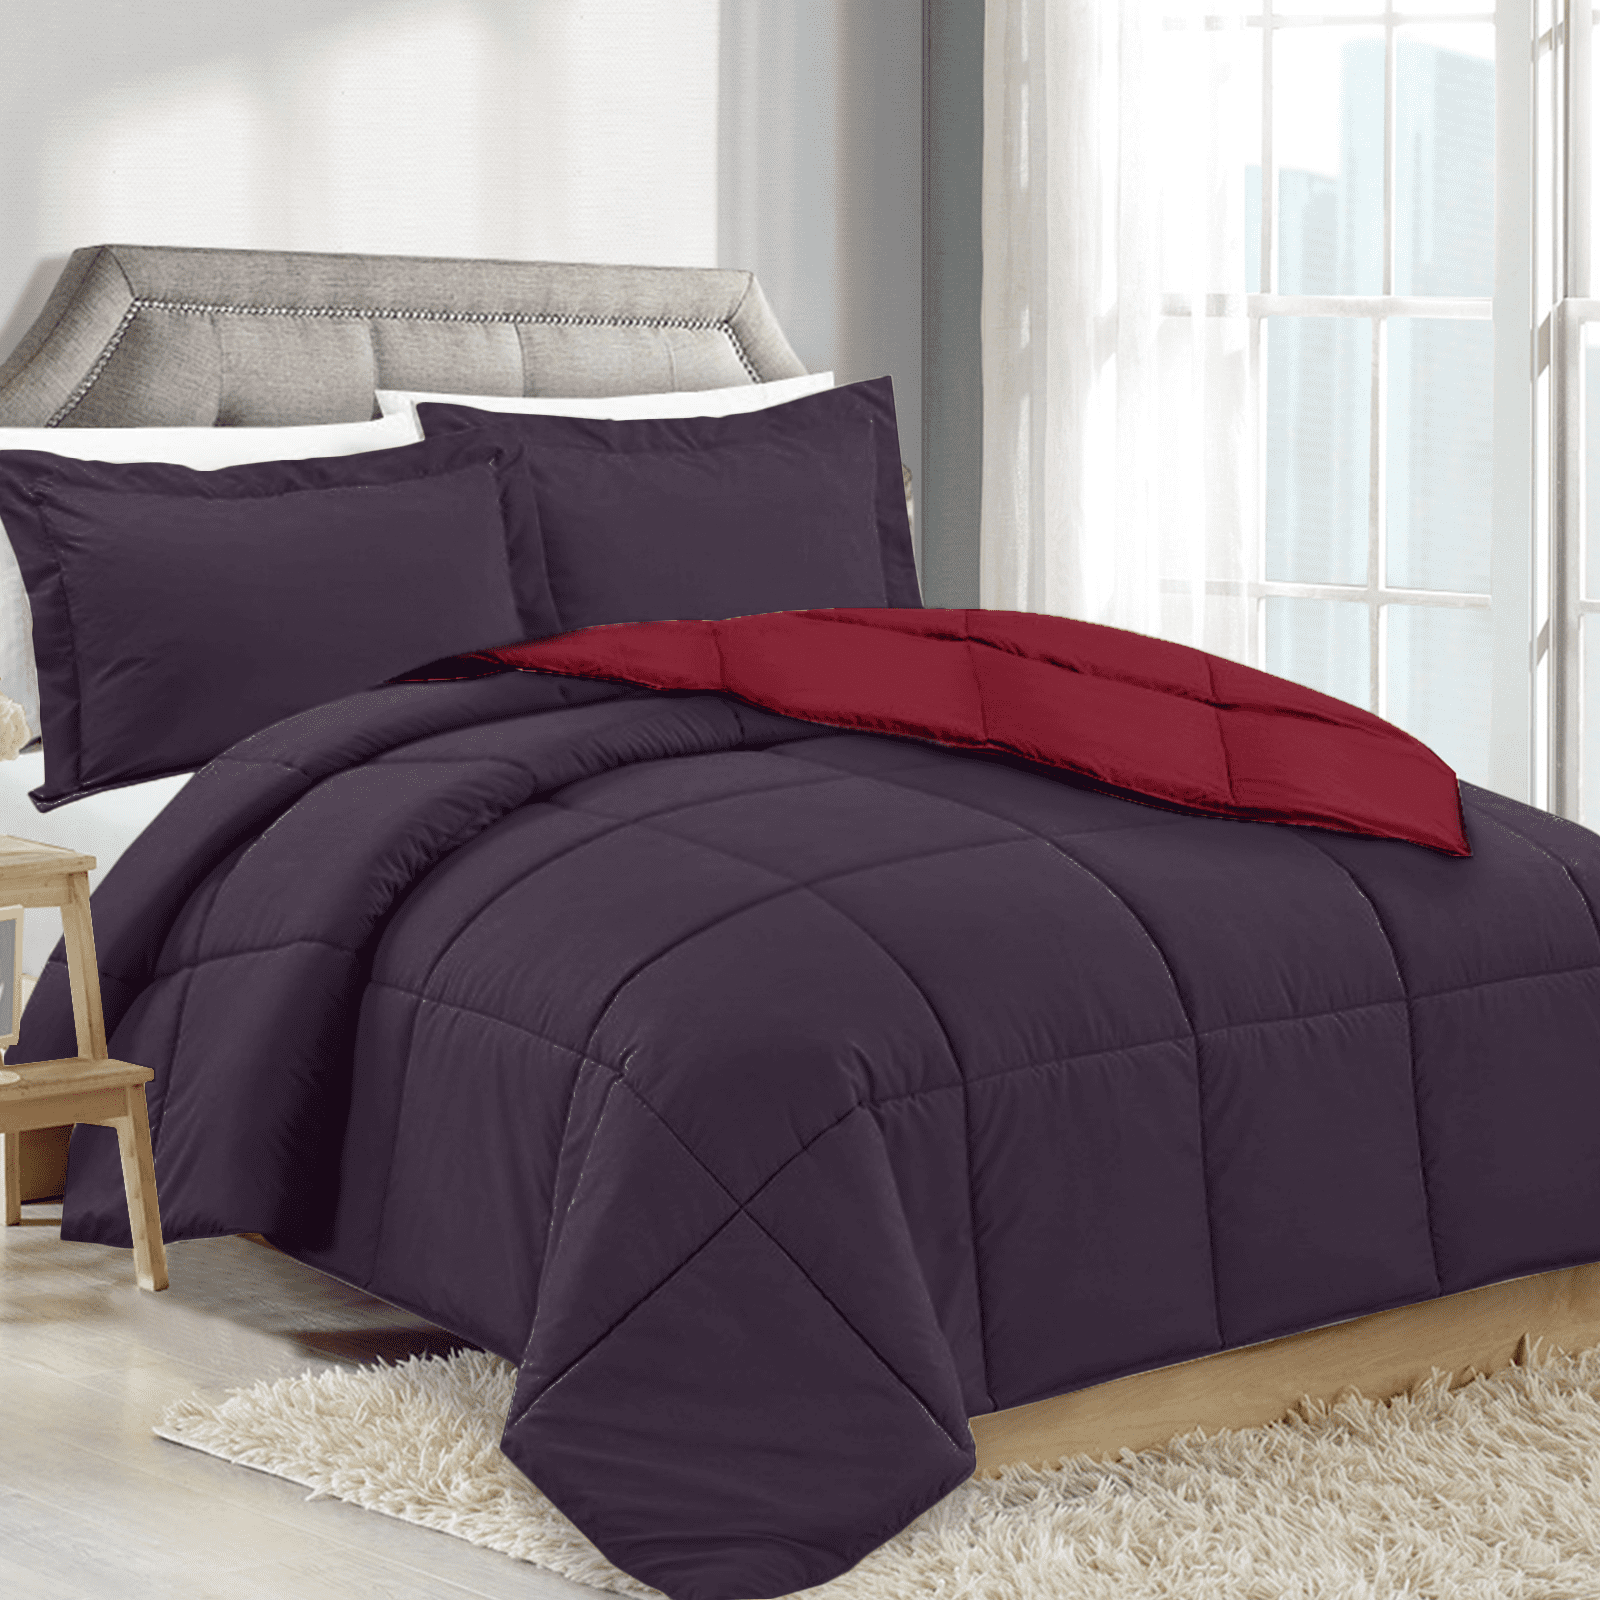 Details about   Red with Gray Play Reversible Microfiber Comforter Set  with Sheet